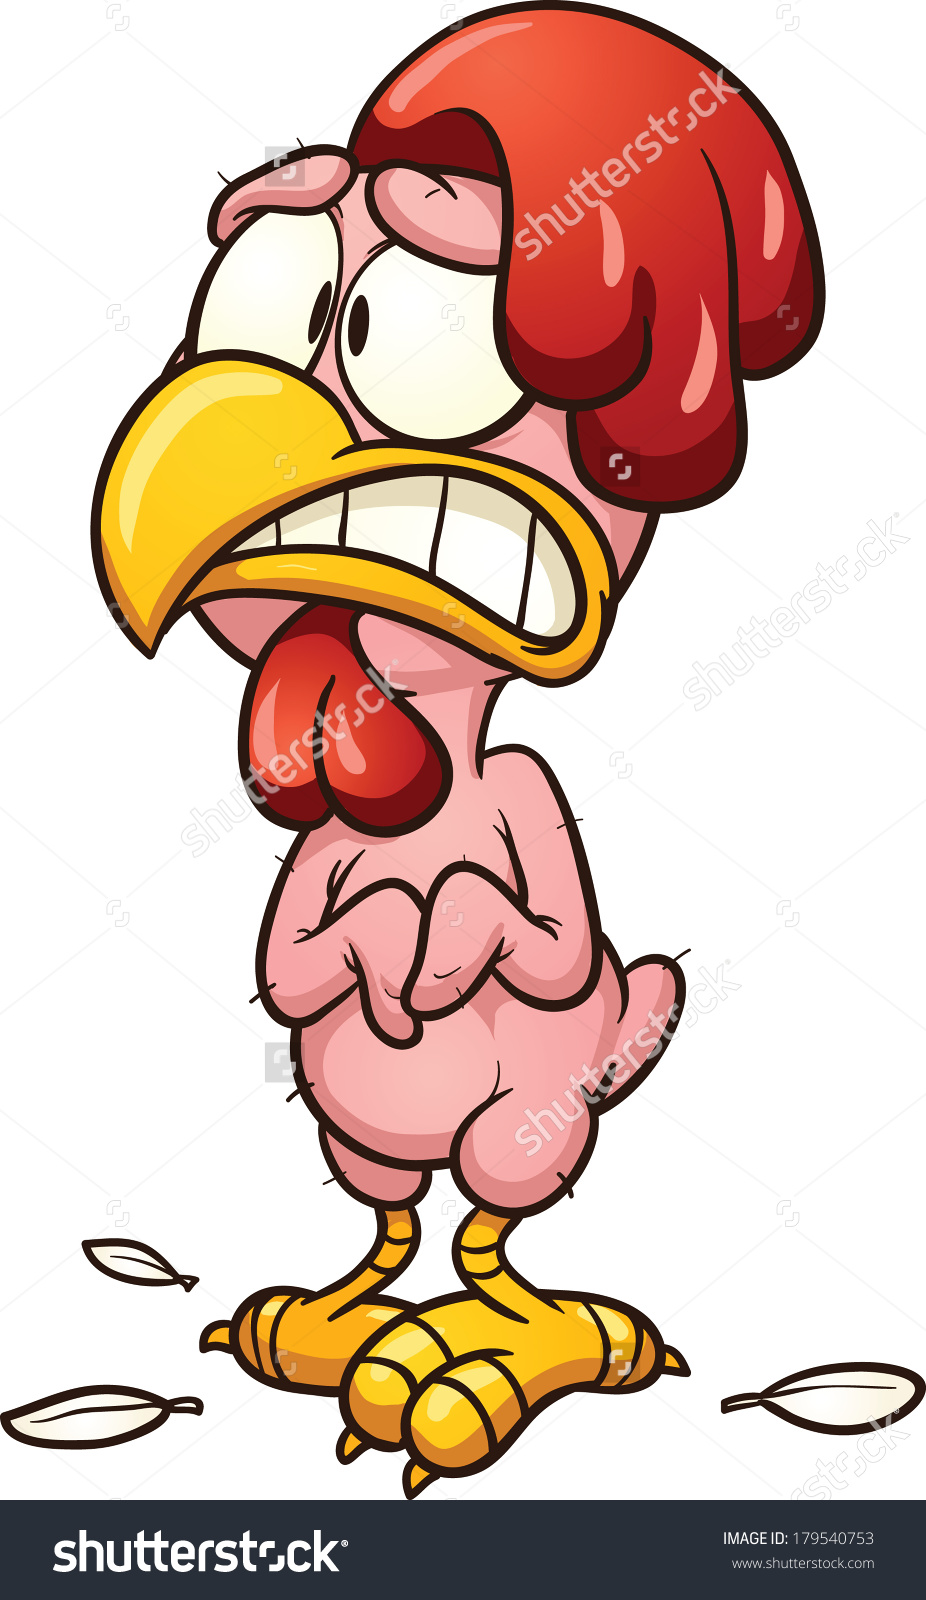 animated chicken clipart - photo #36